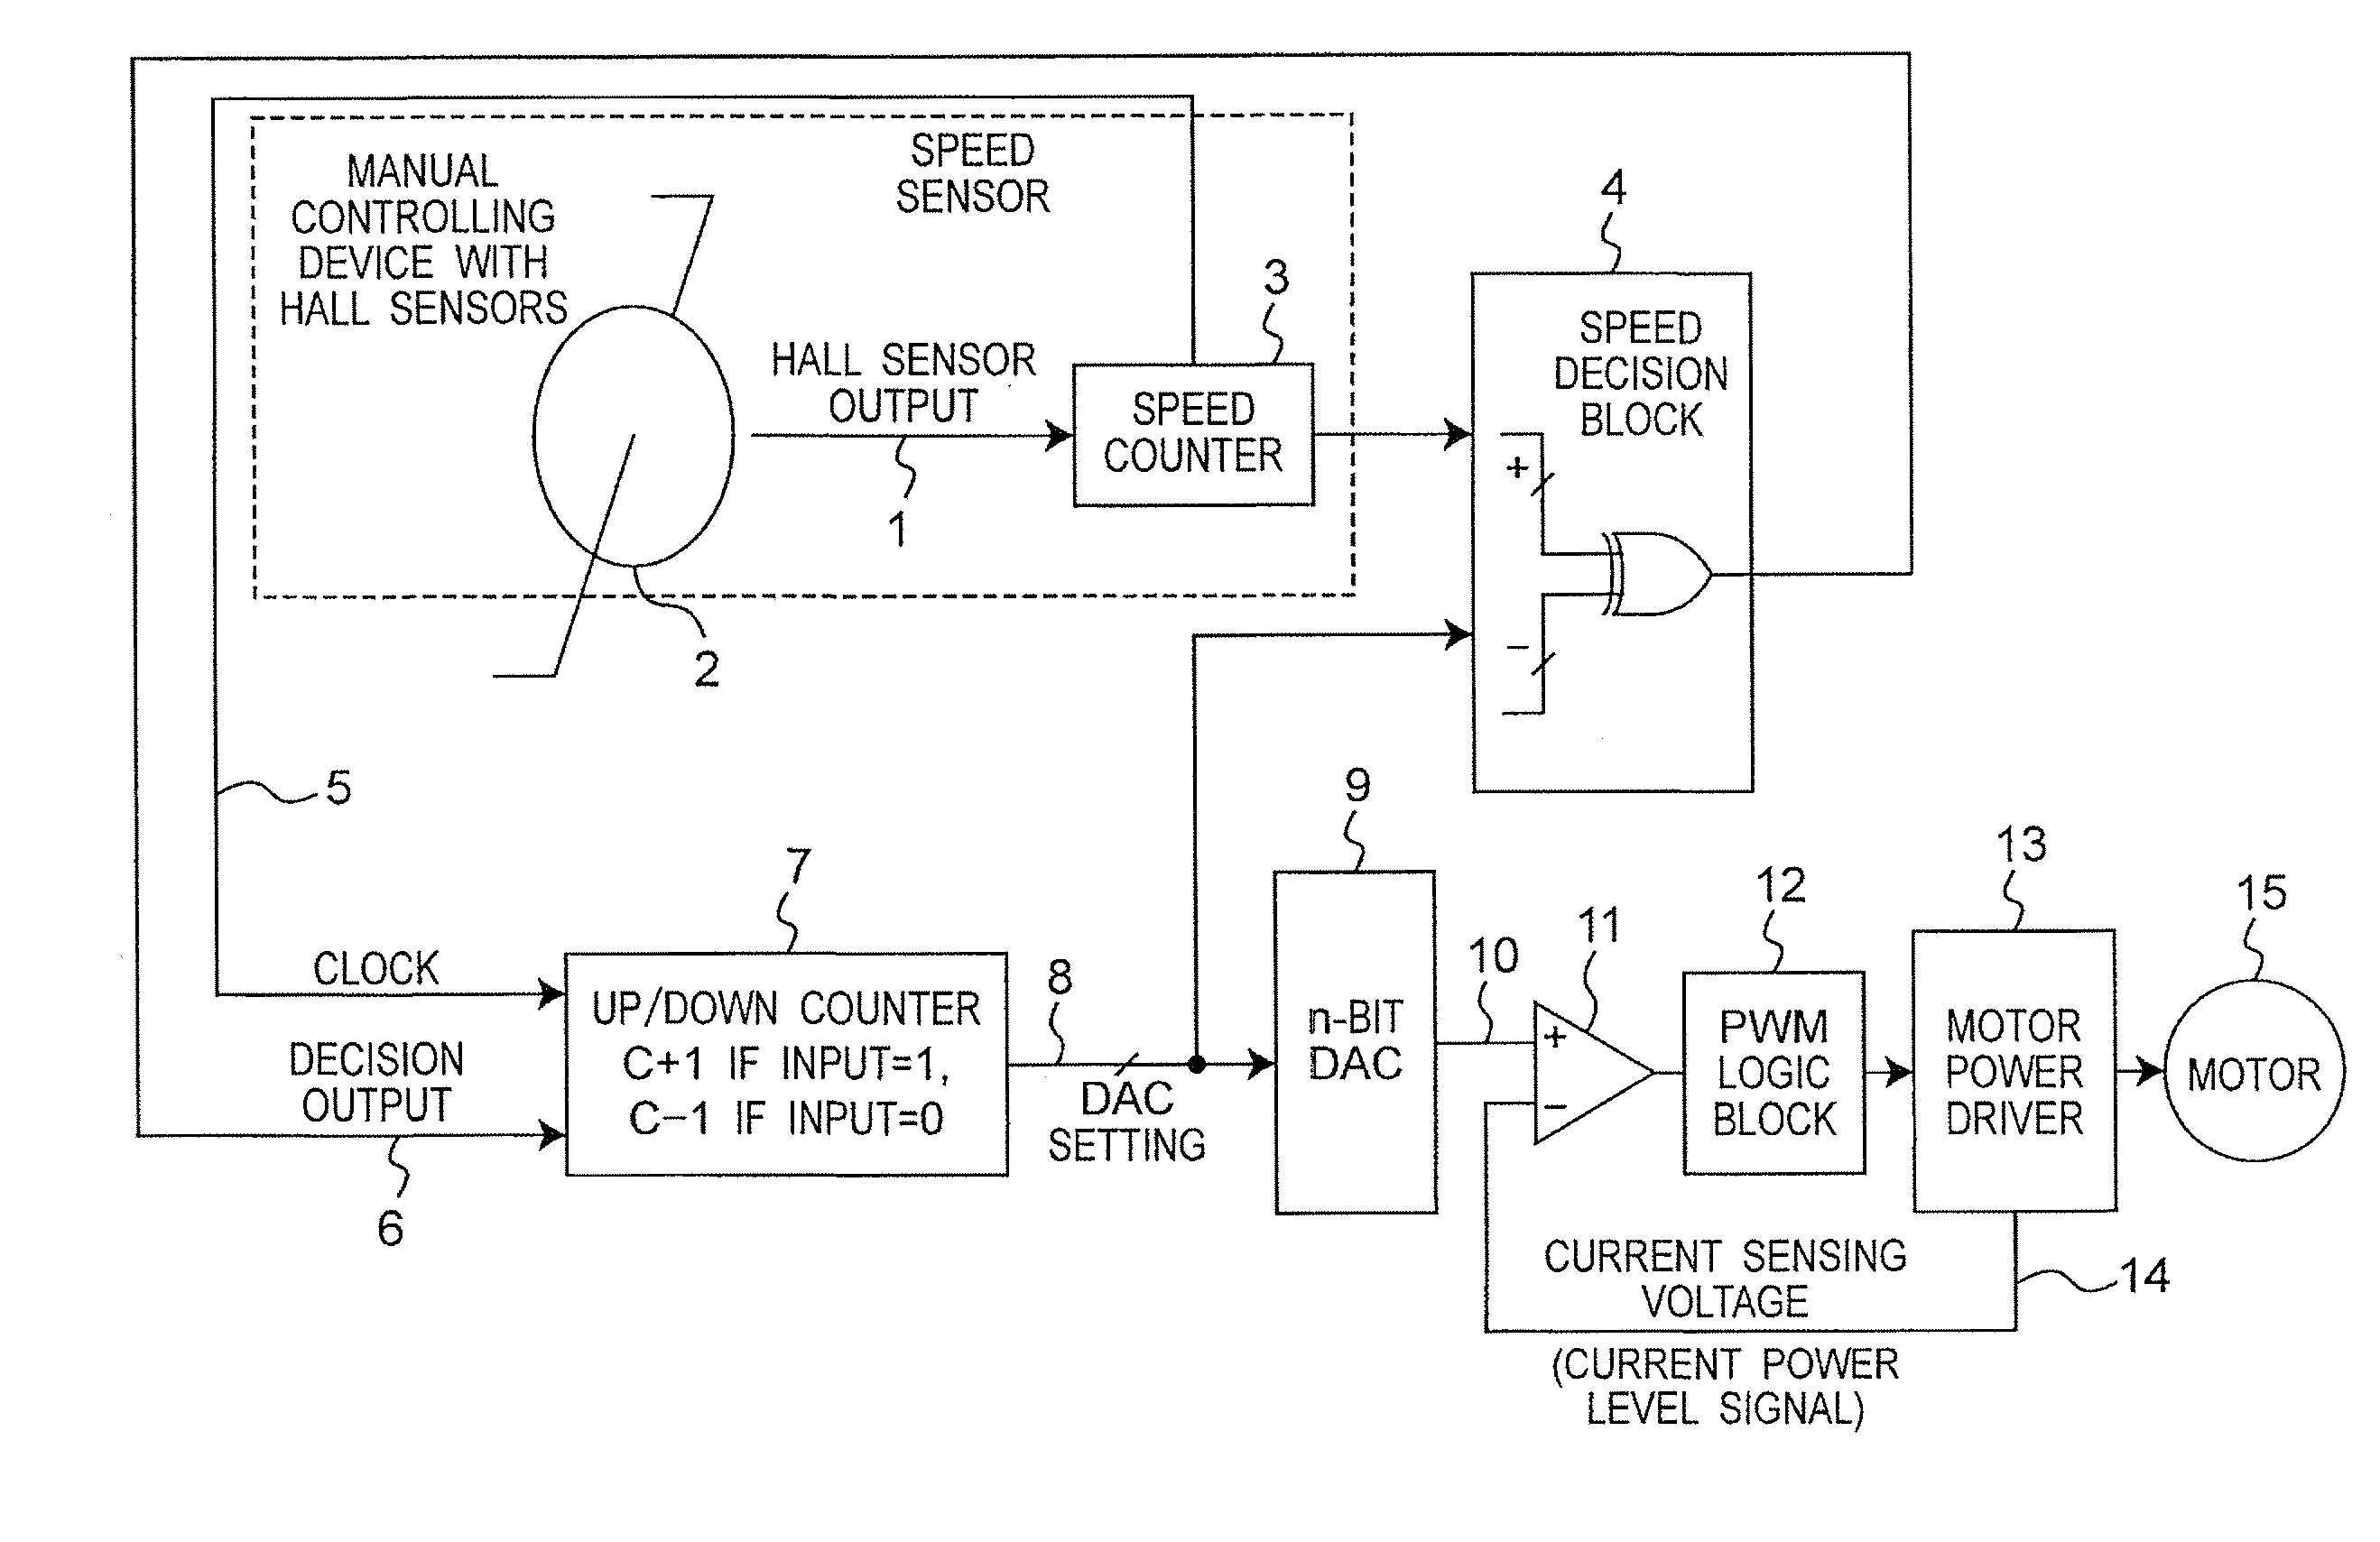 Electric power-assist system for manually-operated vehicle